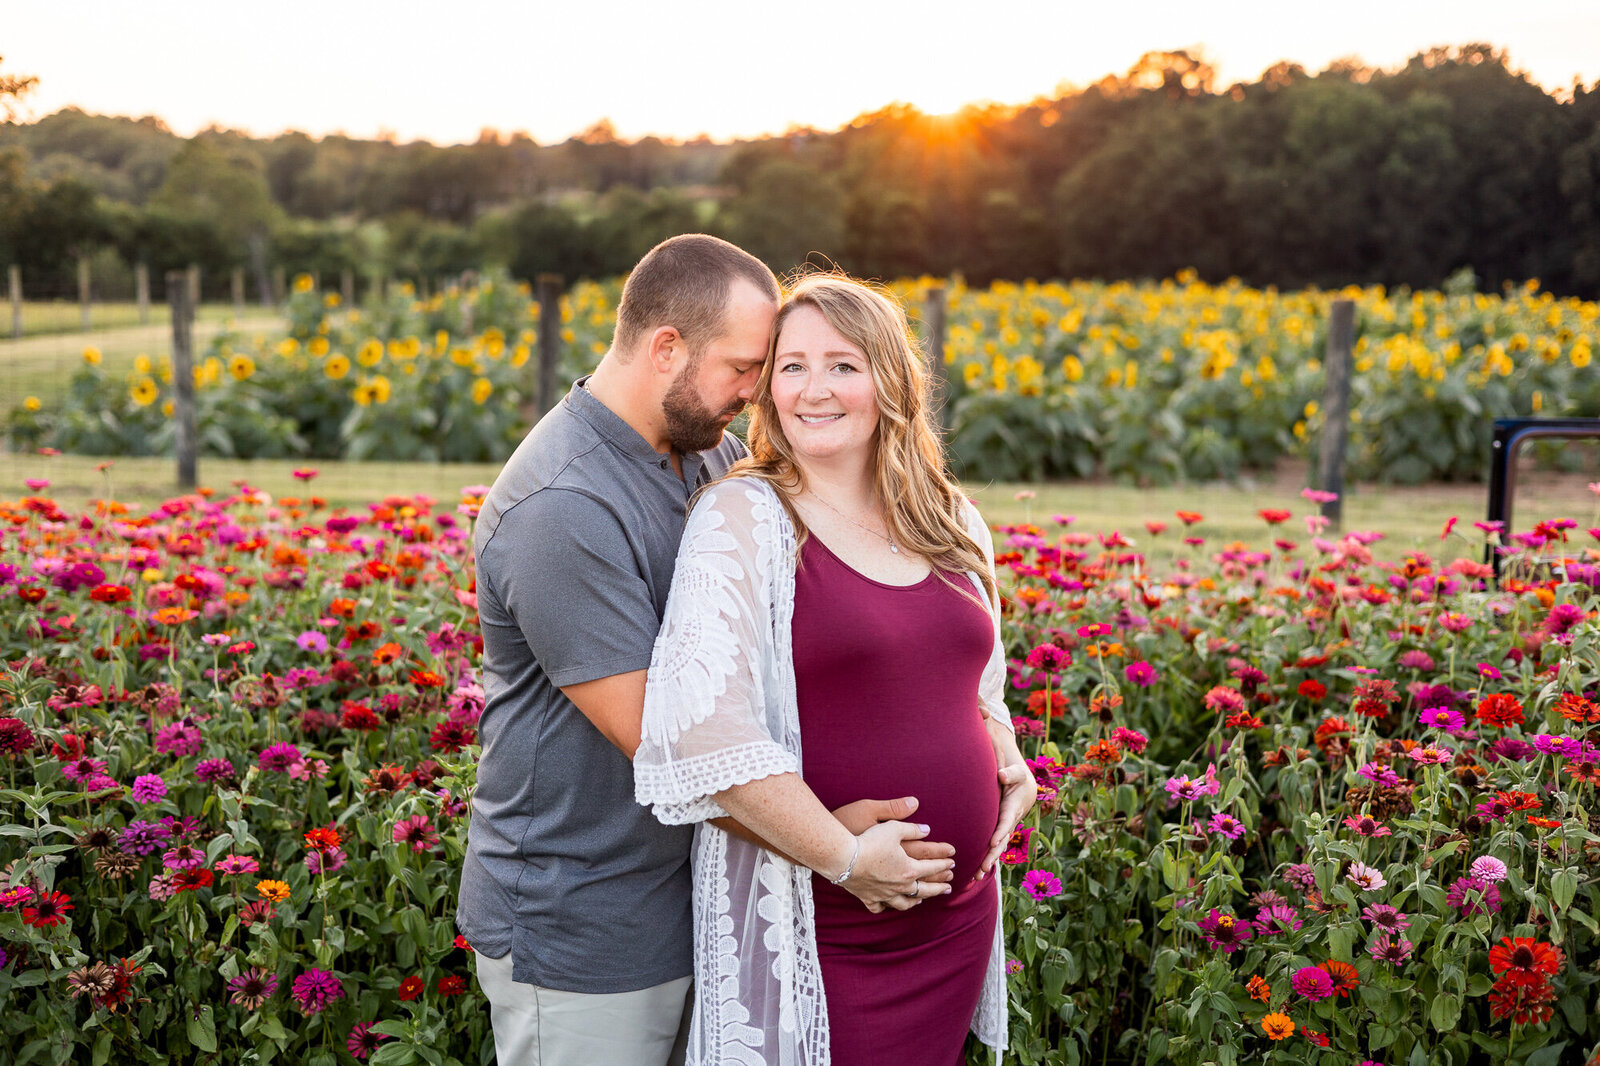 Outdoor-maternity-photography-sunflower-field-Georgetown-KY-photographer-2